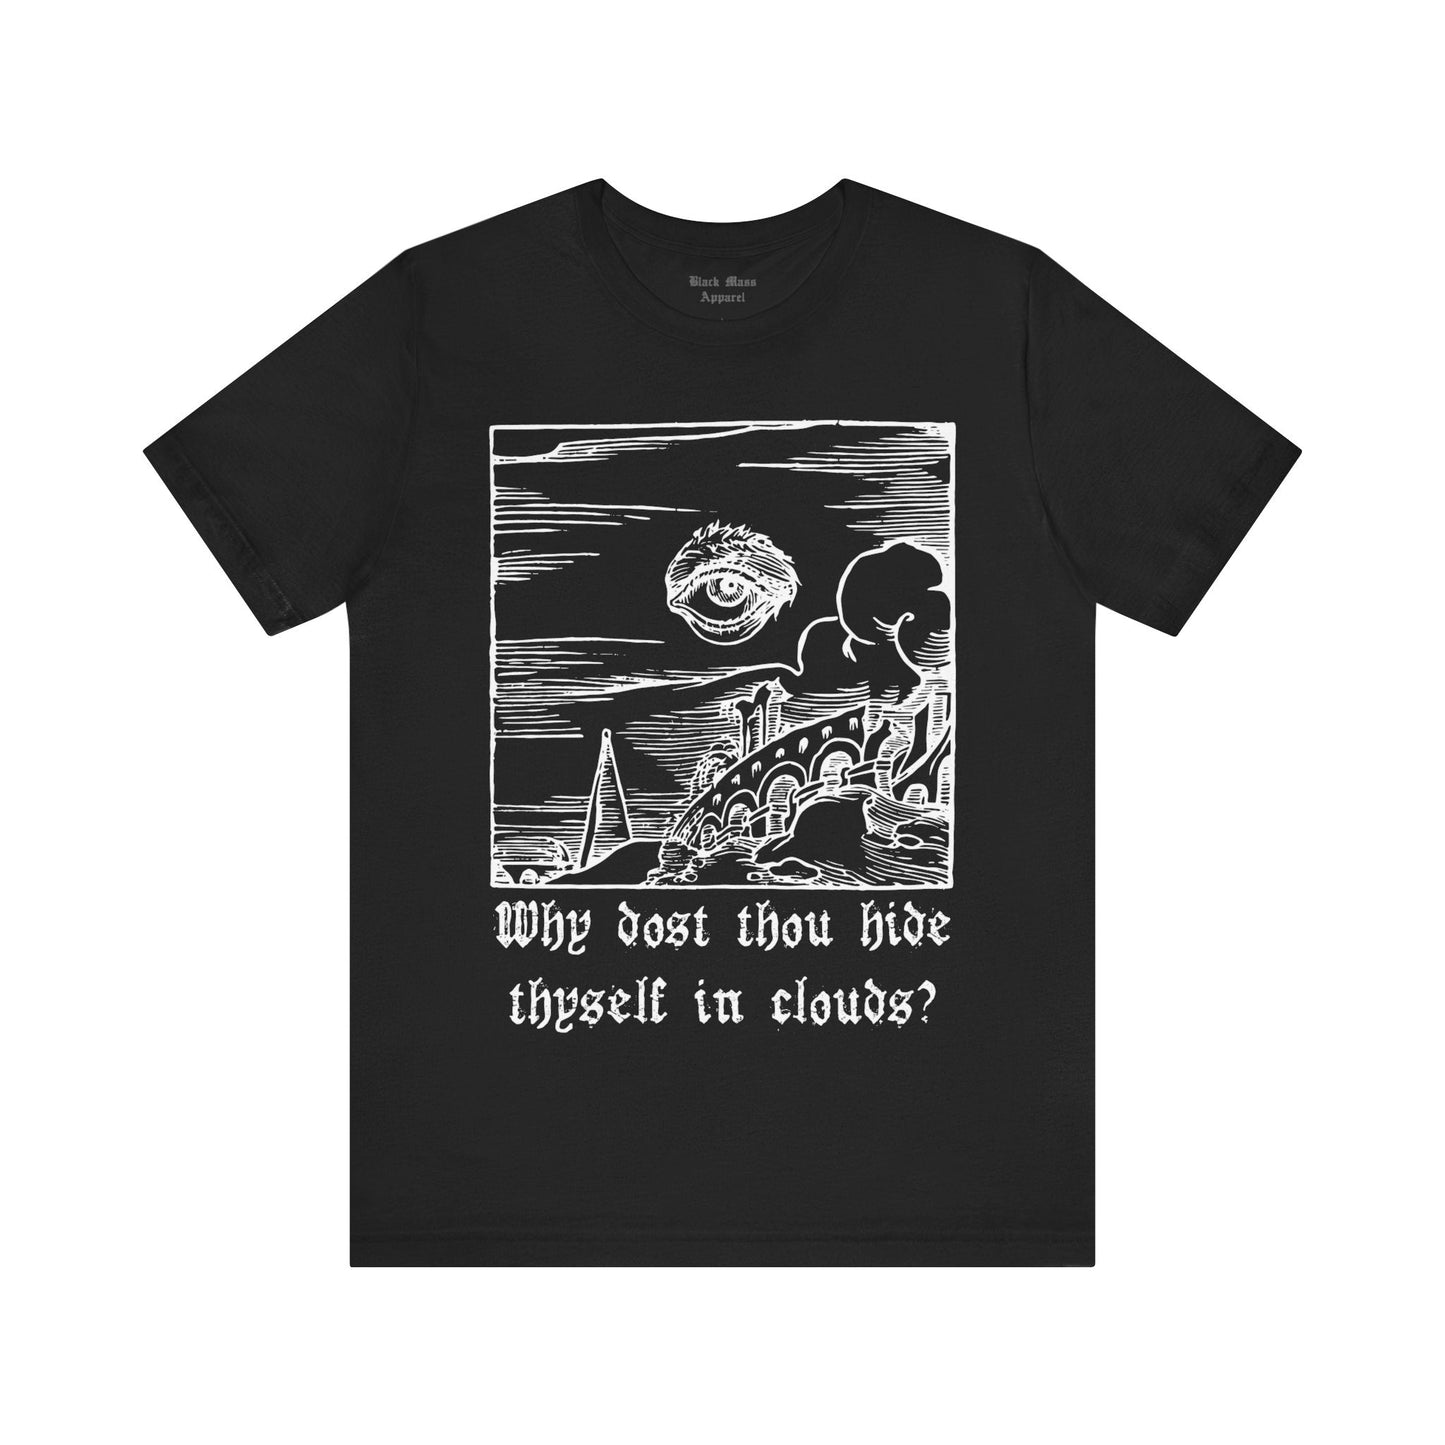 Why dost thou hide thyself in clouds? - Black Mass Apparel - T-Shirt